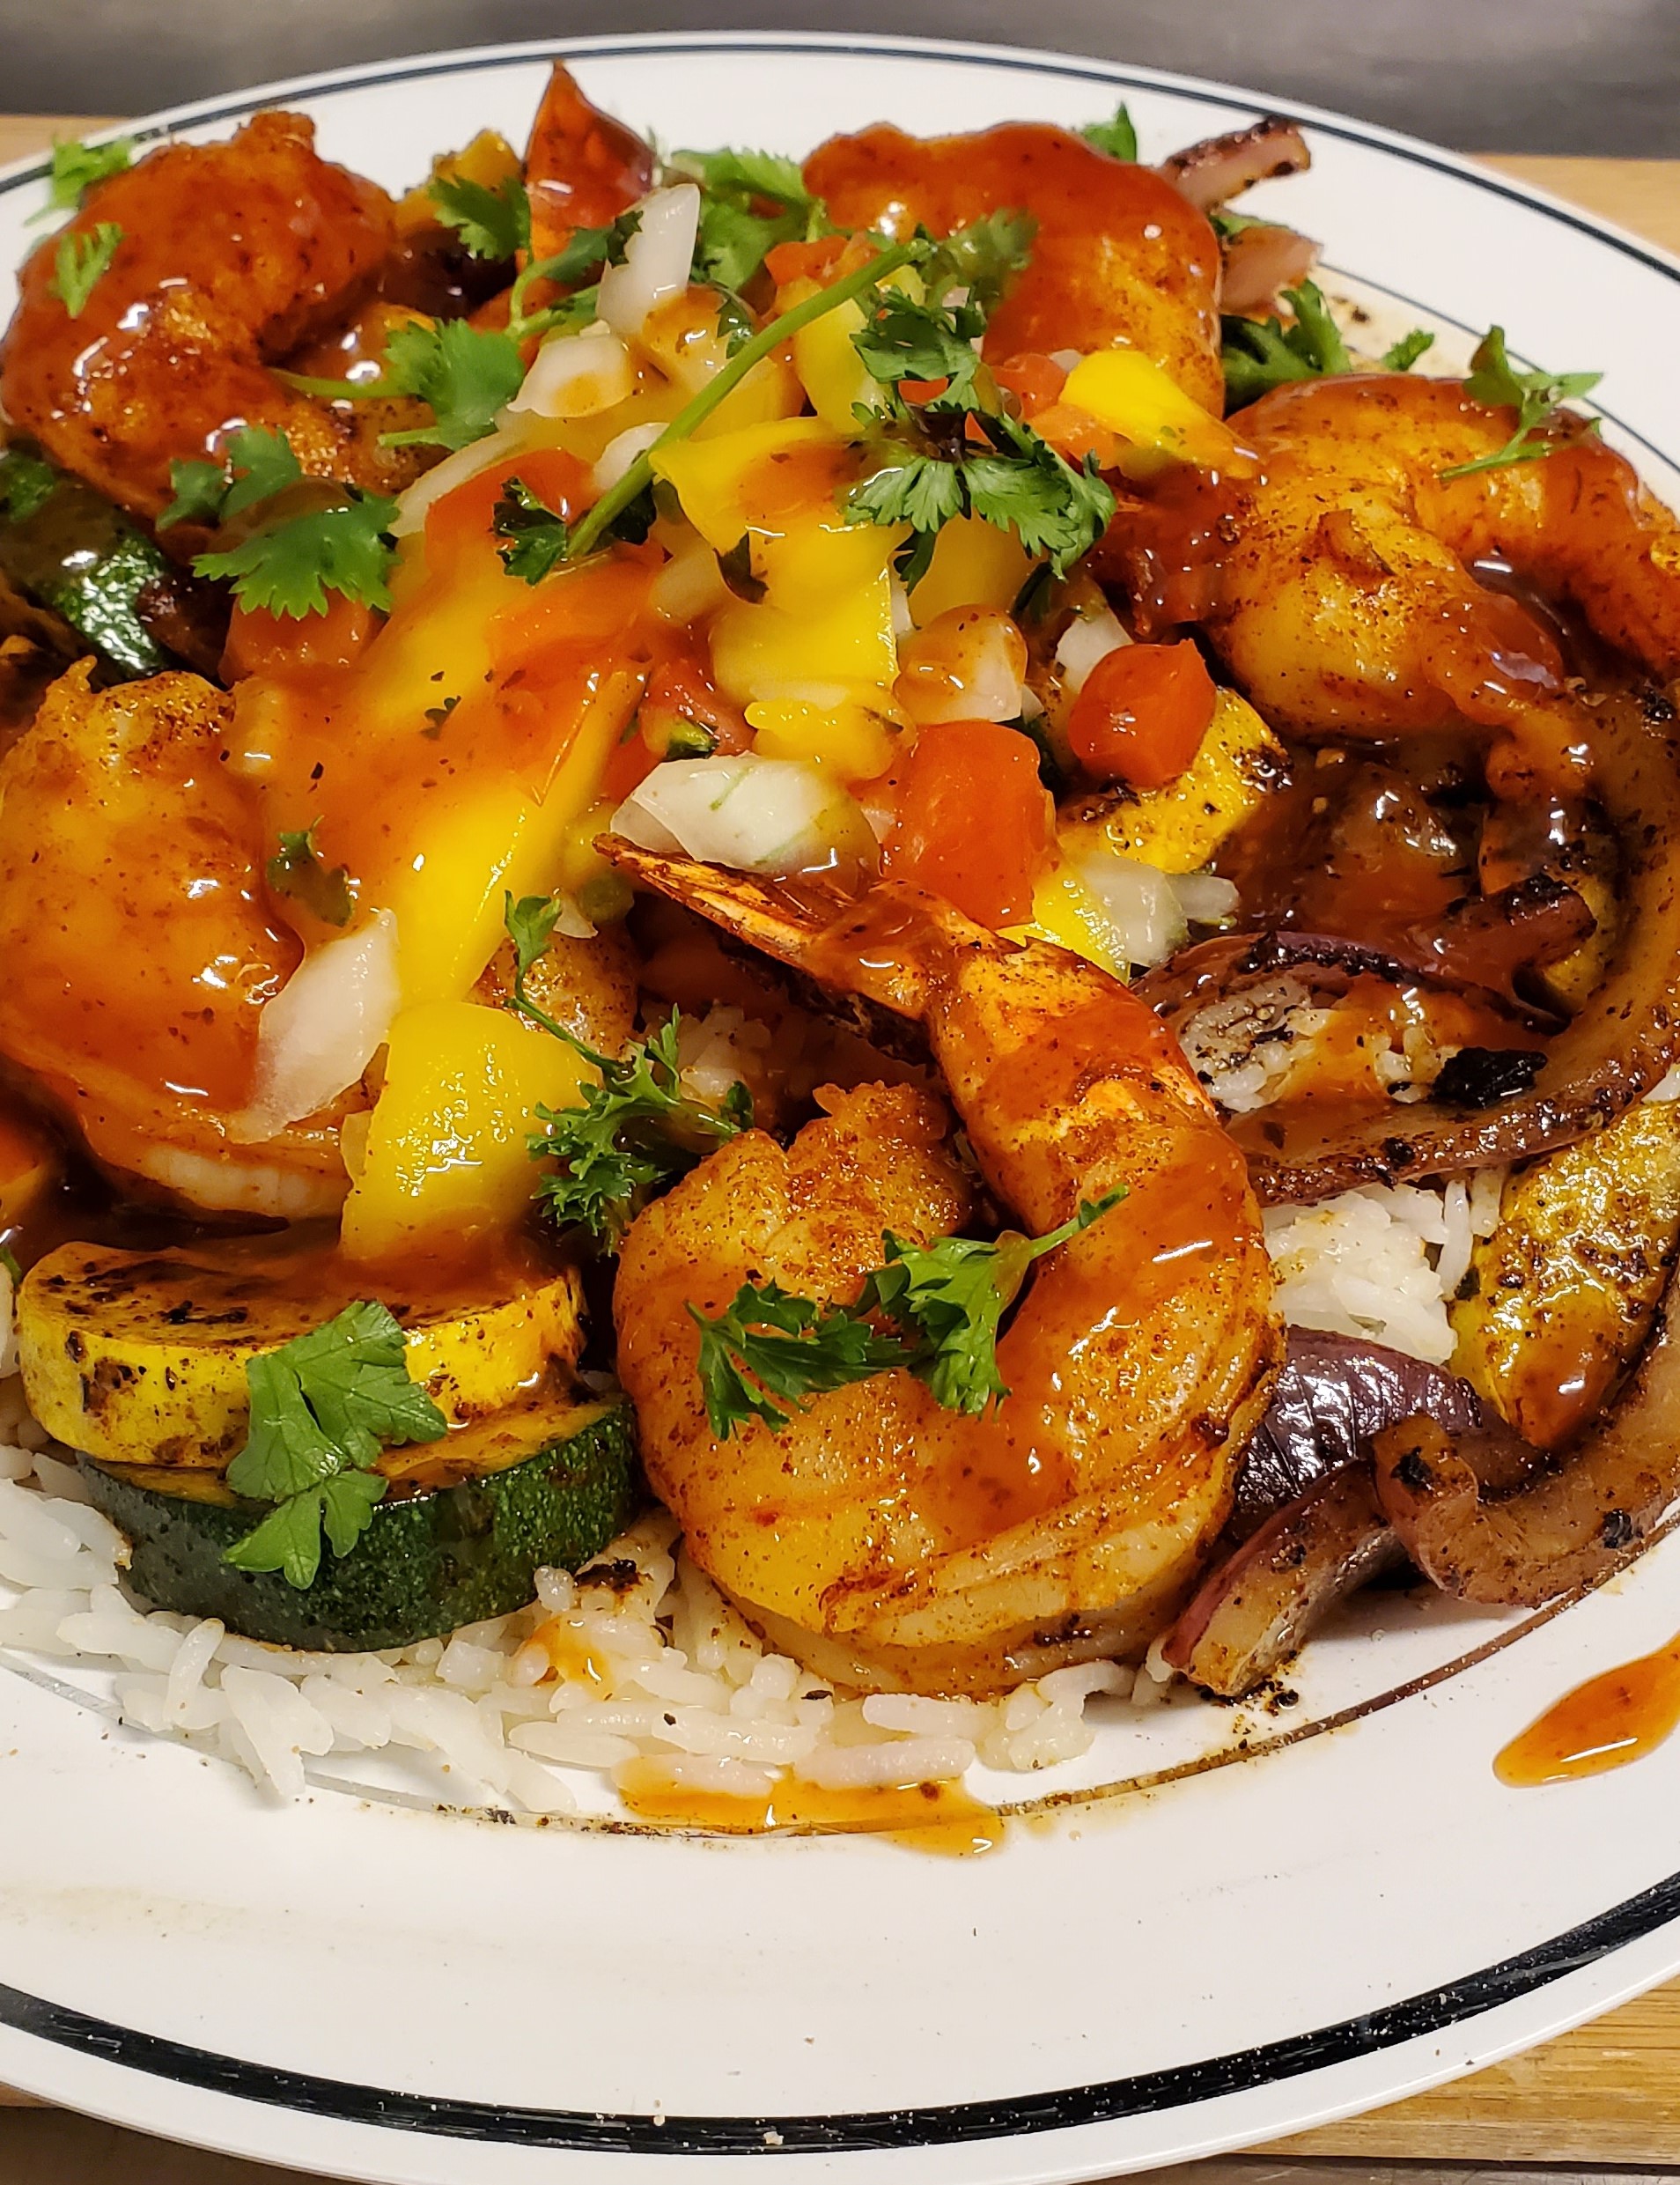 Plate with rice, vegetables, large grilled shrimp and mango salsa.